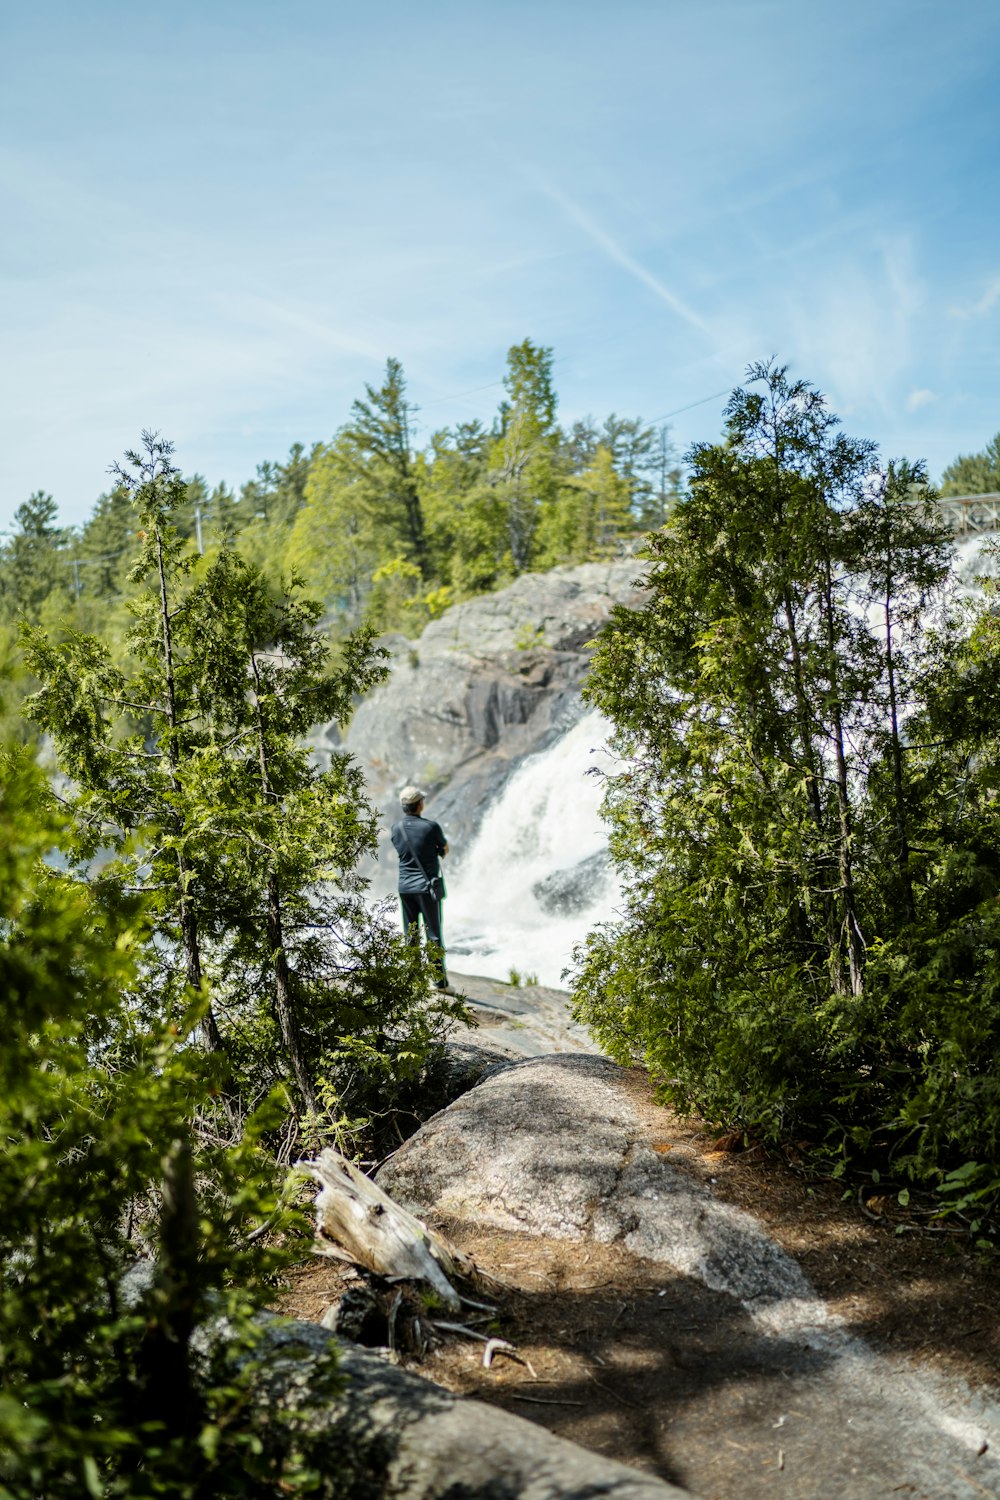 a person standing on a rock near a waterfall